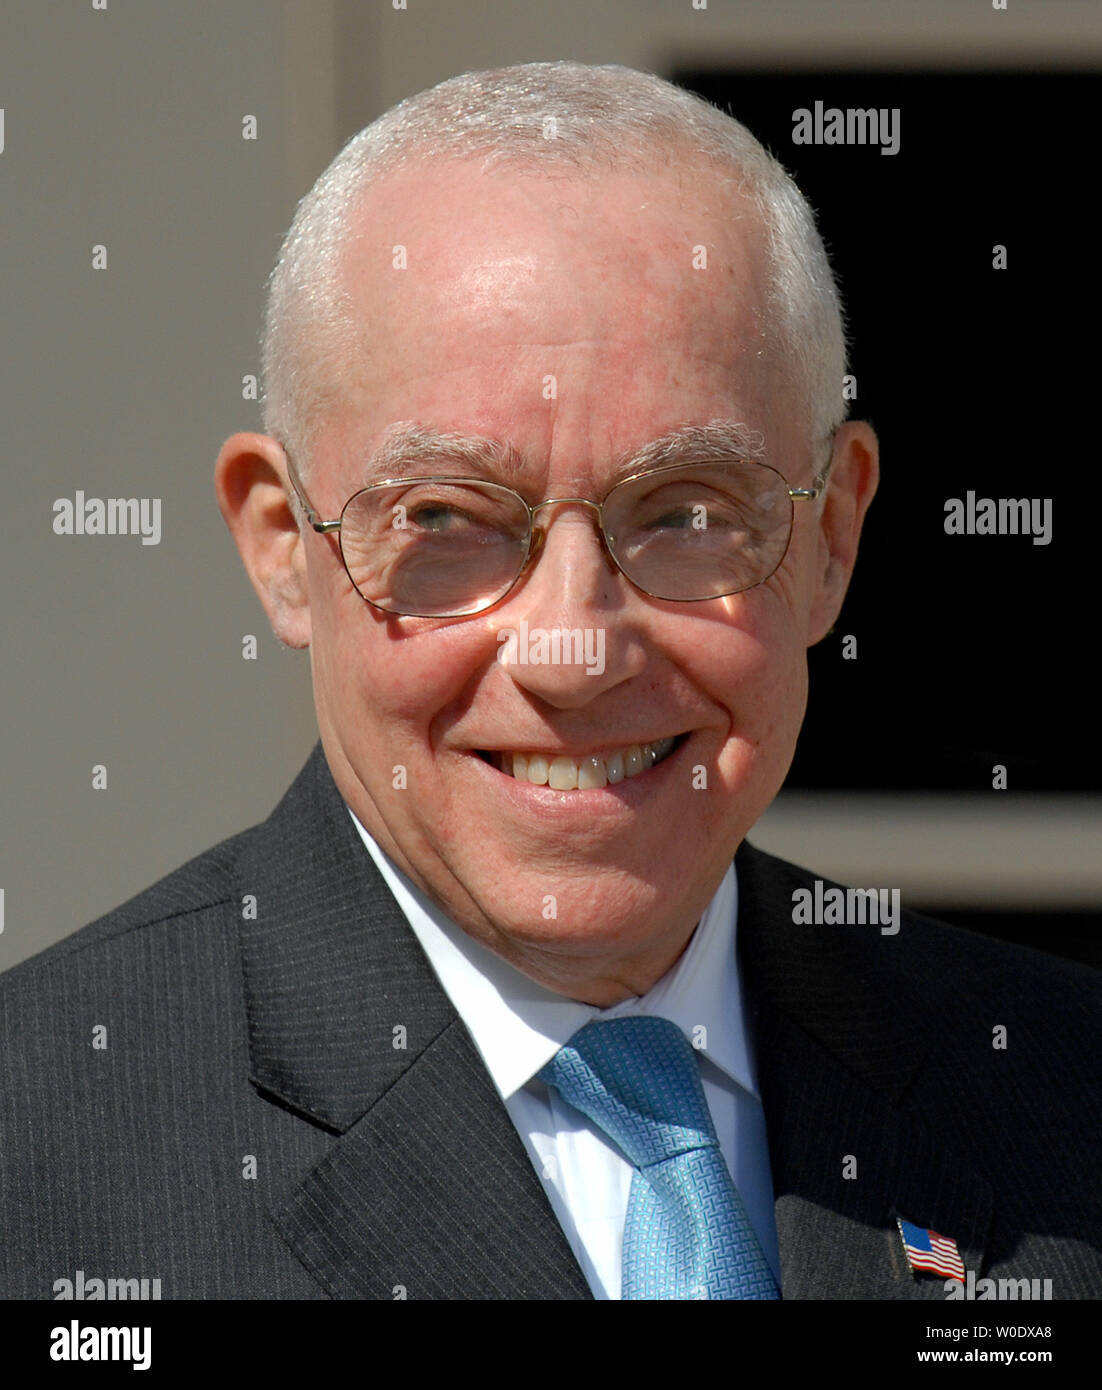 Michael B. Mukasey, a retired federal judge from New York, smiles as U.S. President George W. Bush announces his nomination of Mukasey to replace Alberto Gonzales as attorney general in the Rose Garden of the White House on September 17, 2007.   (UPI Photo/Roger L. Wollenberg) Stock Photo